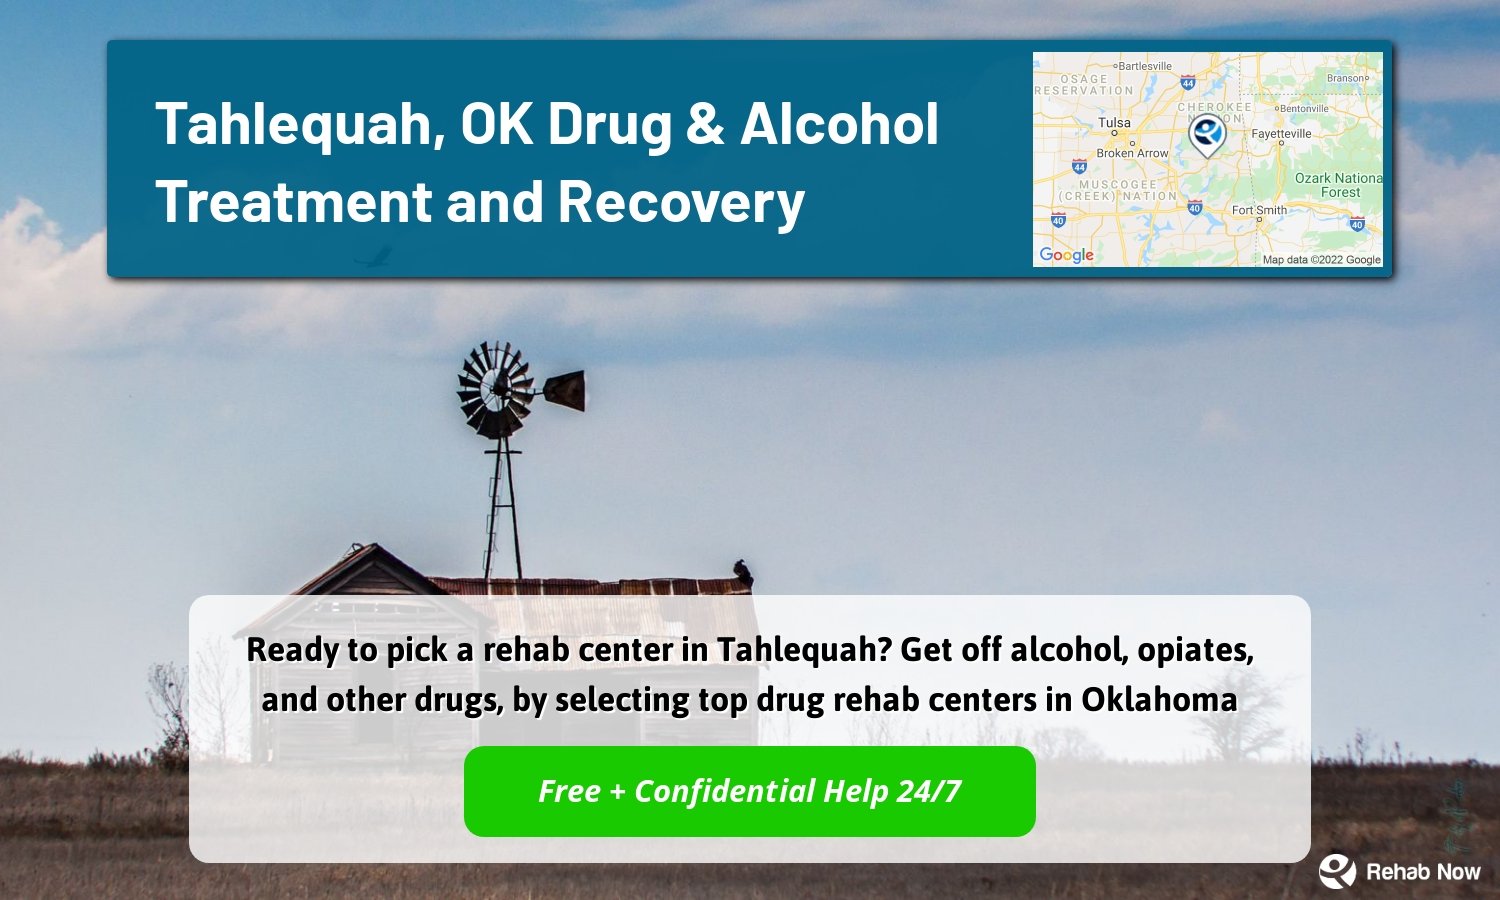 Ready to pick a rehab center in Tahlequah? Get off alcohol, opiates, and other drugs, by selecting top drug rehab centers in Oklahoma